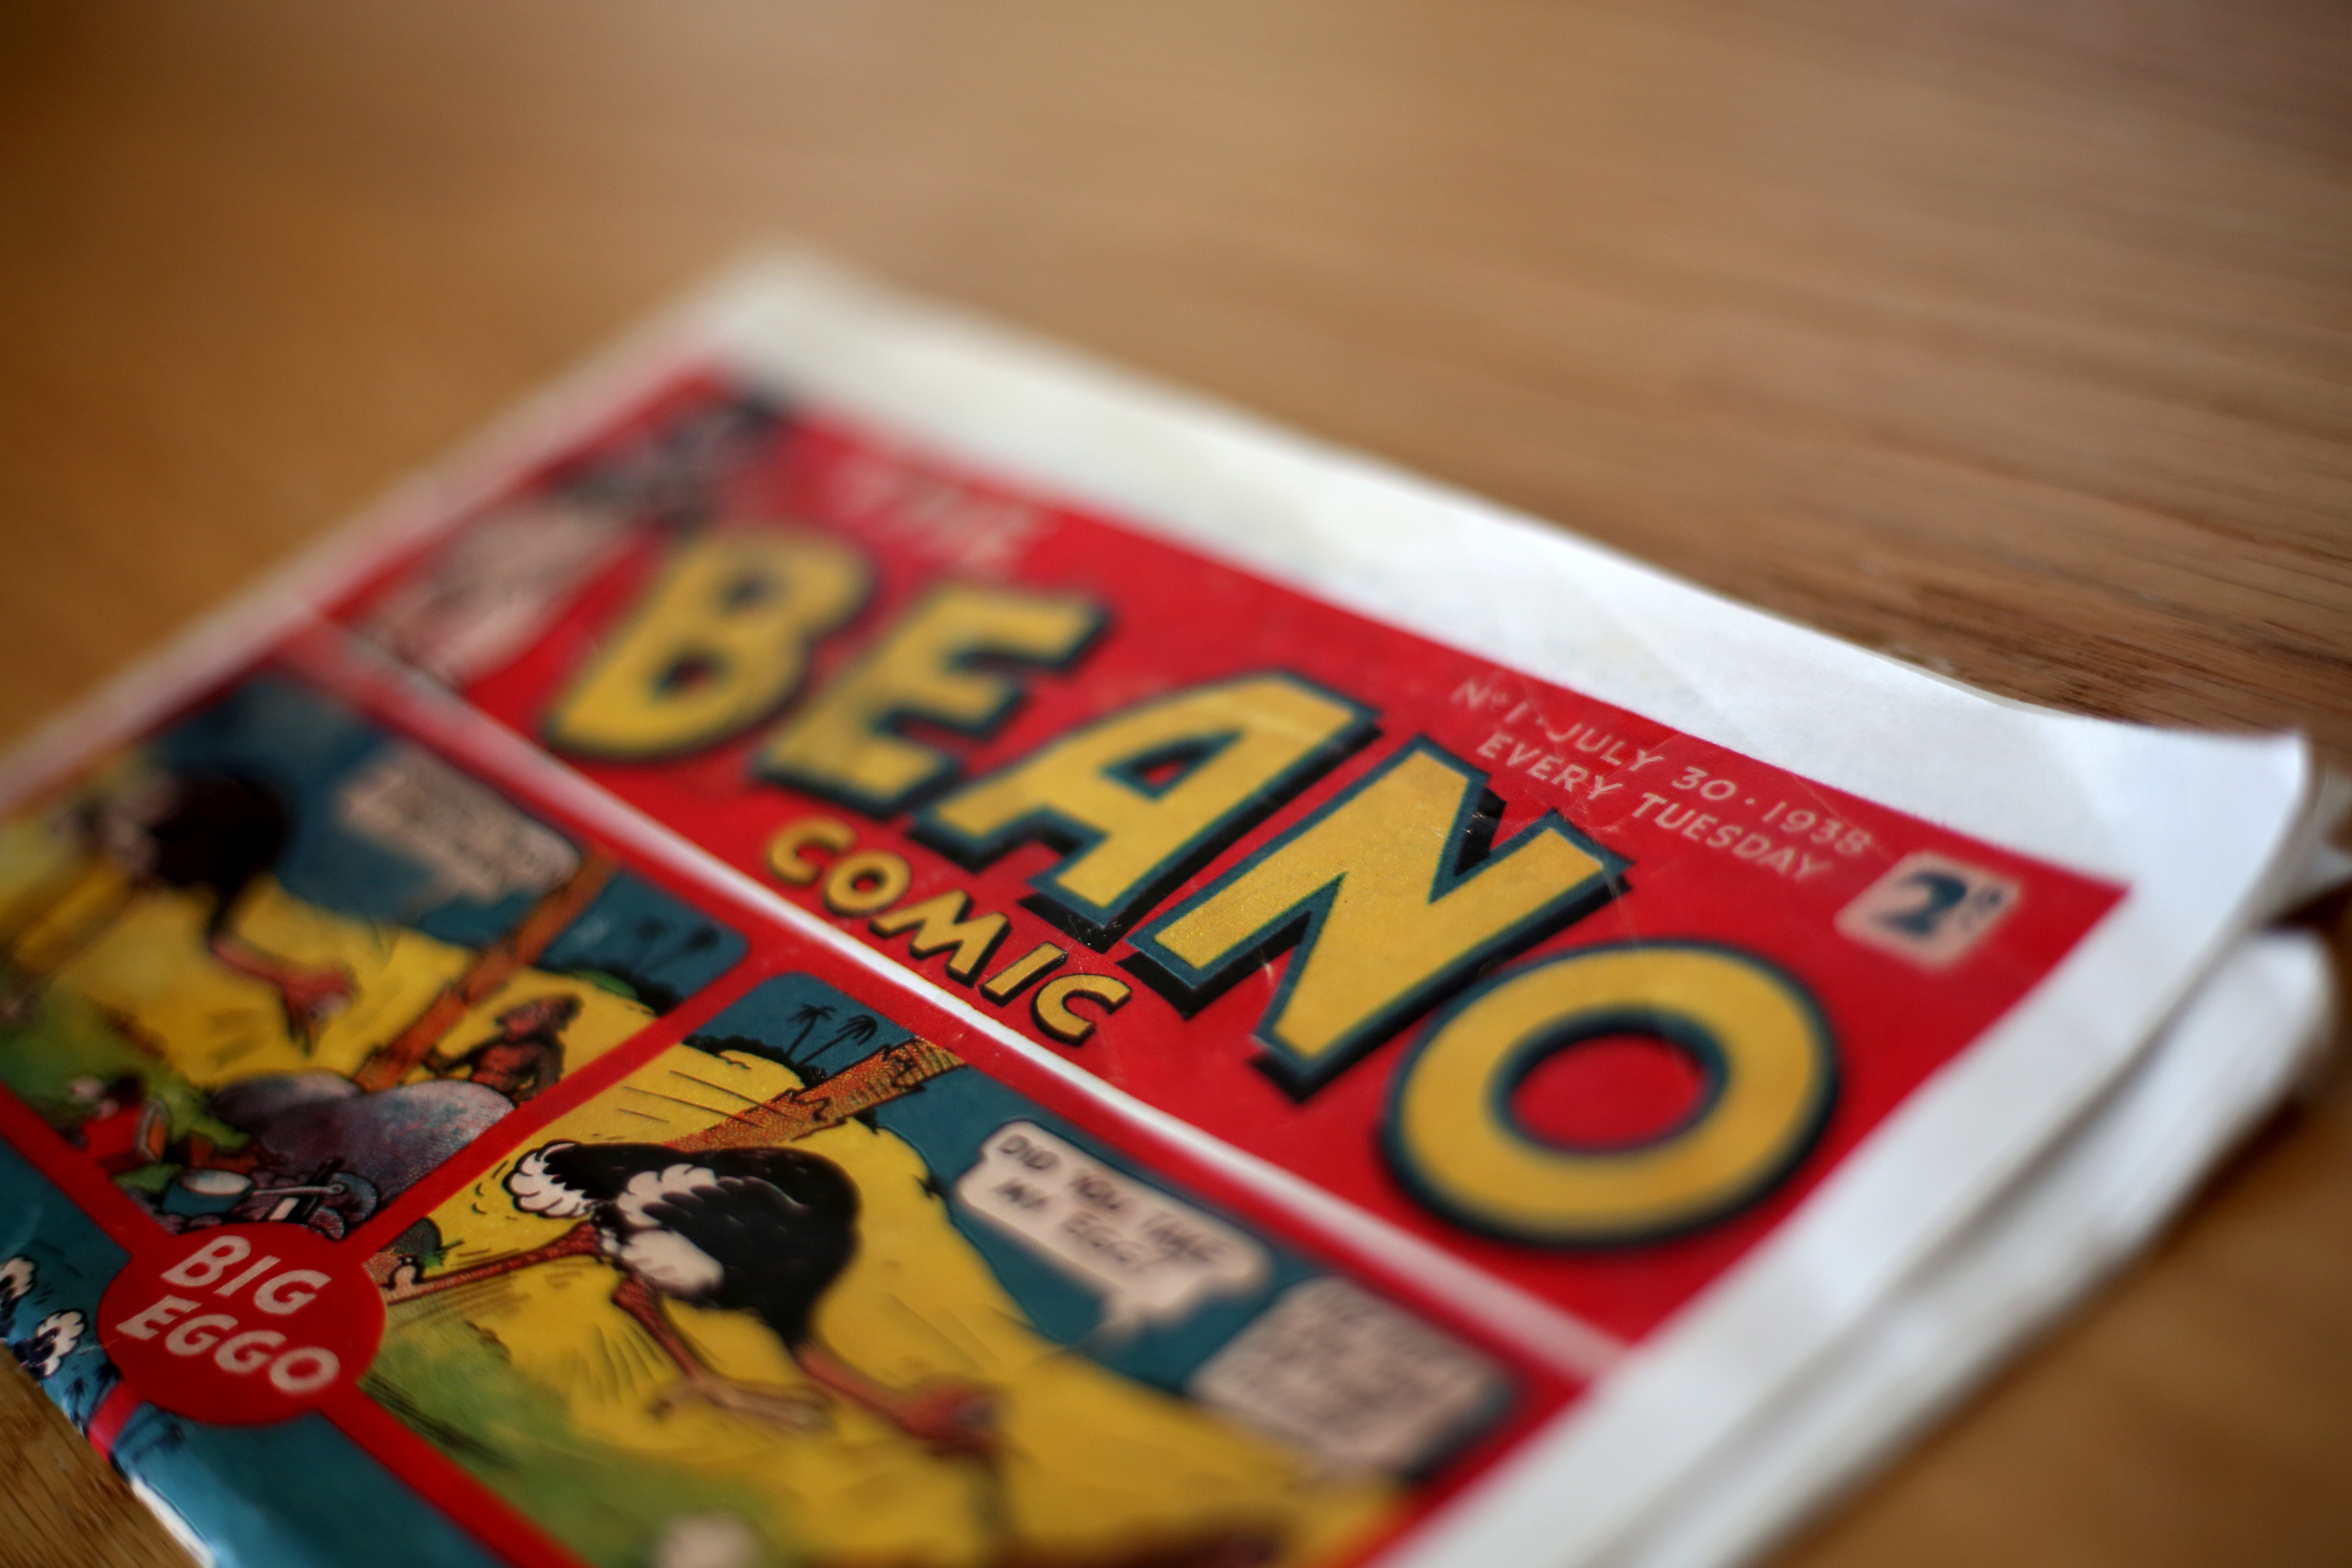 First edition of the Beano comic - estimated to be worth up to £20,000